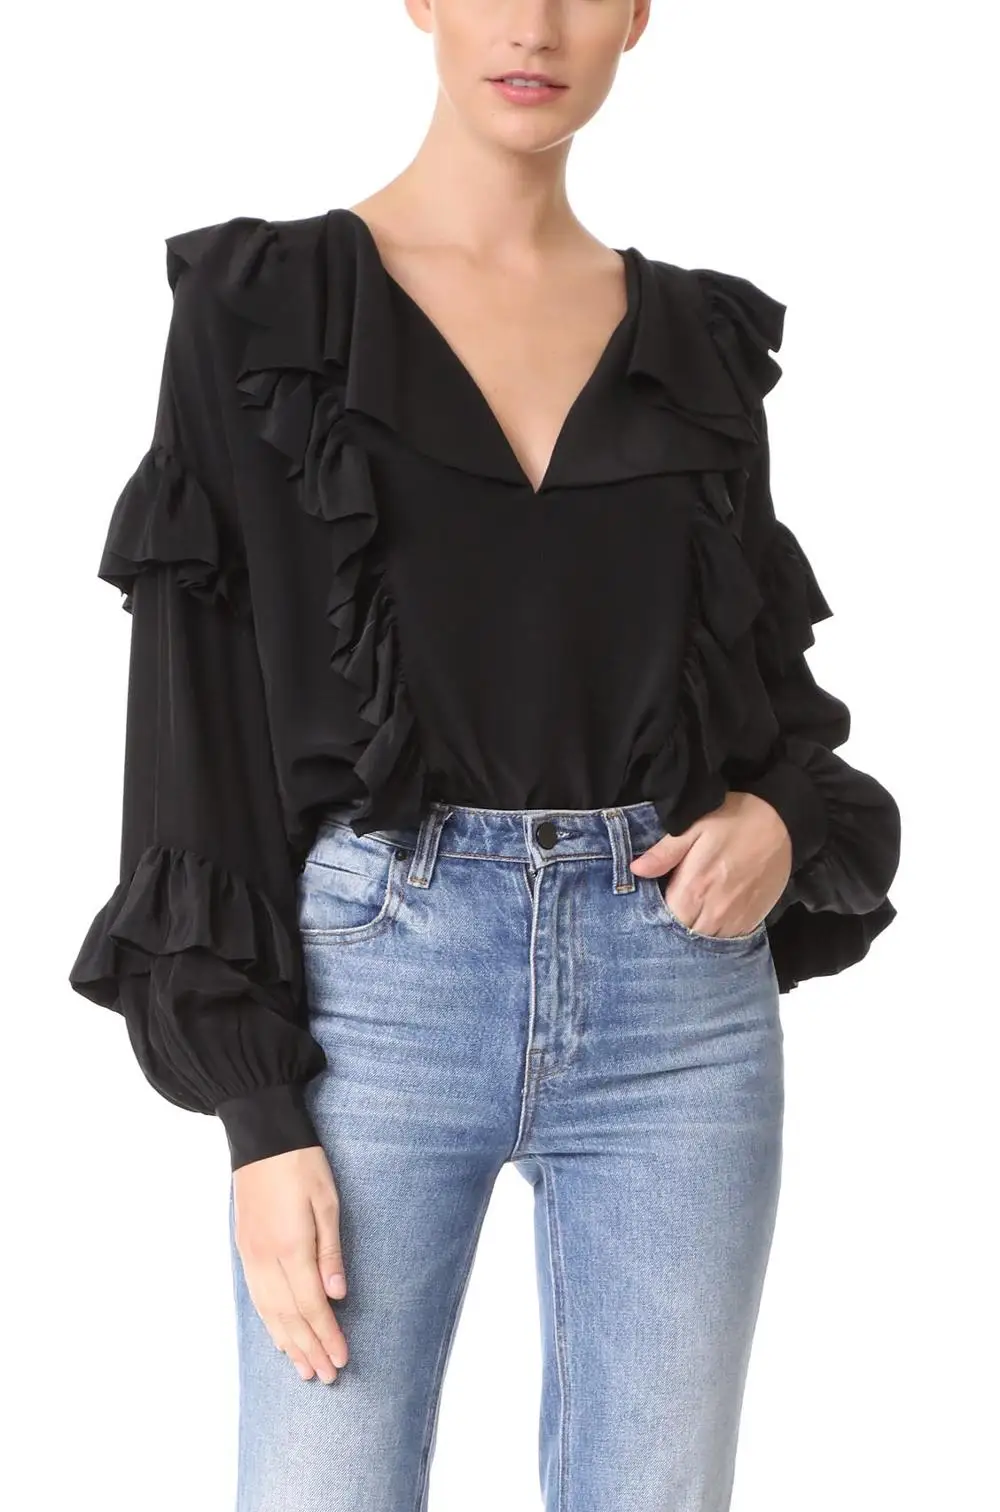 blouse piece company overseas clothing suppliers